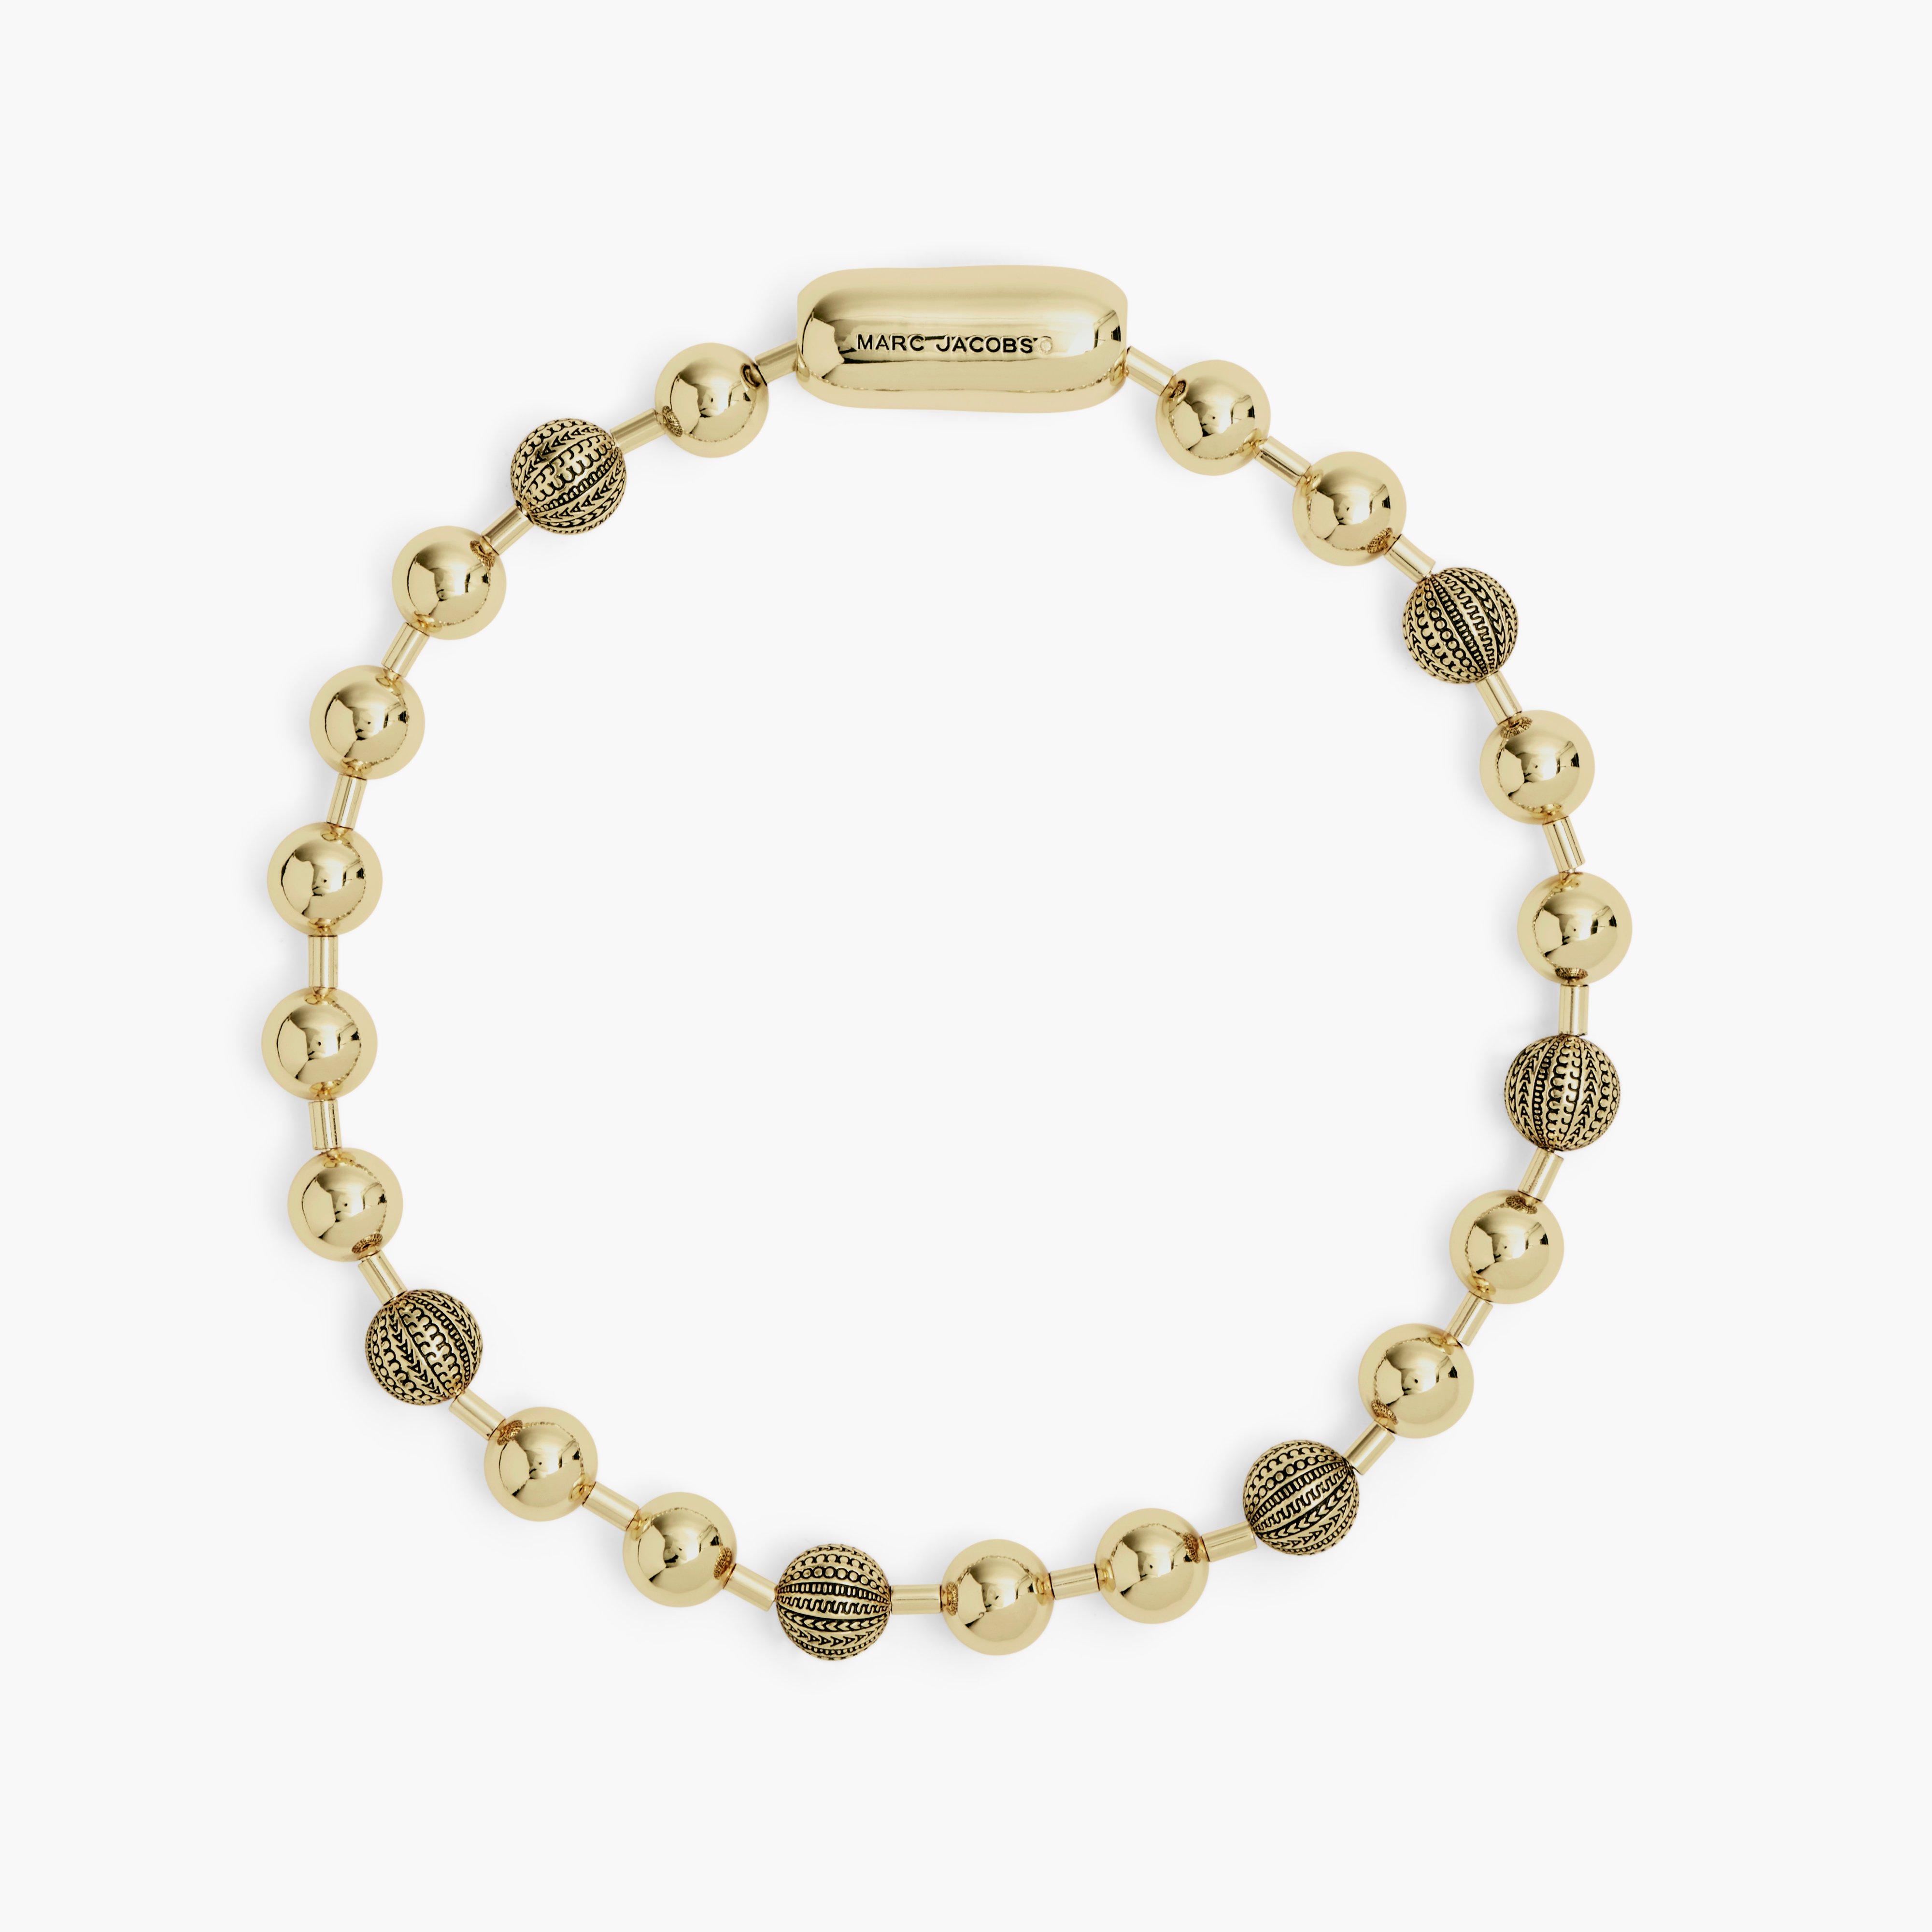 Marc by Marc jacobs The Monogram Ball Chain Necklace,LIGHT ANTIQUE GOLD